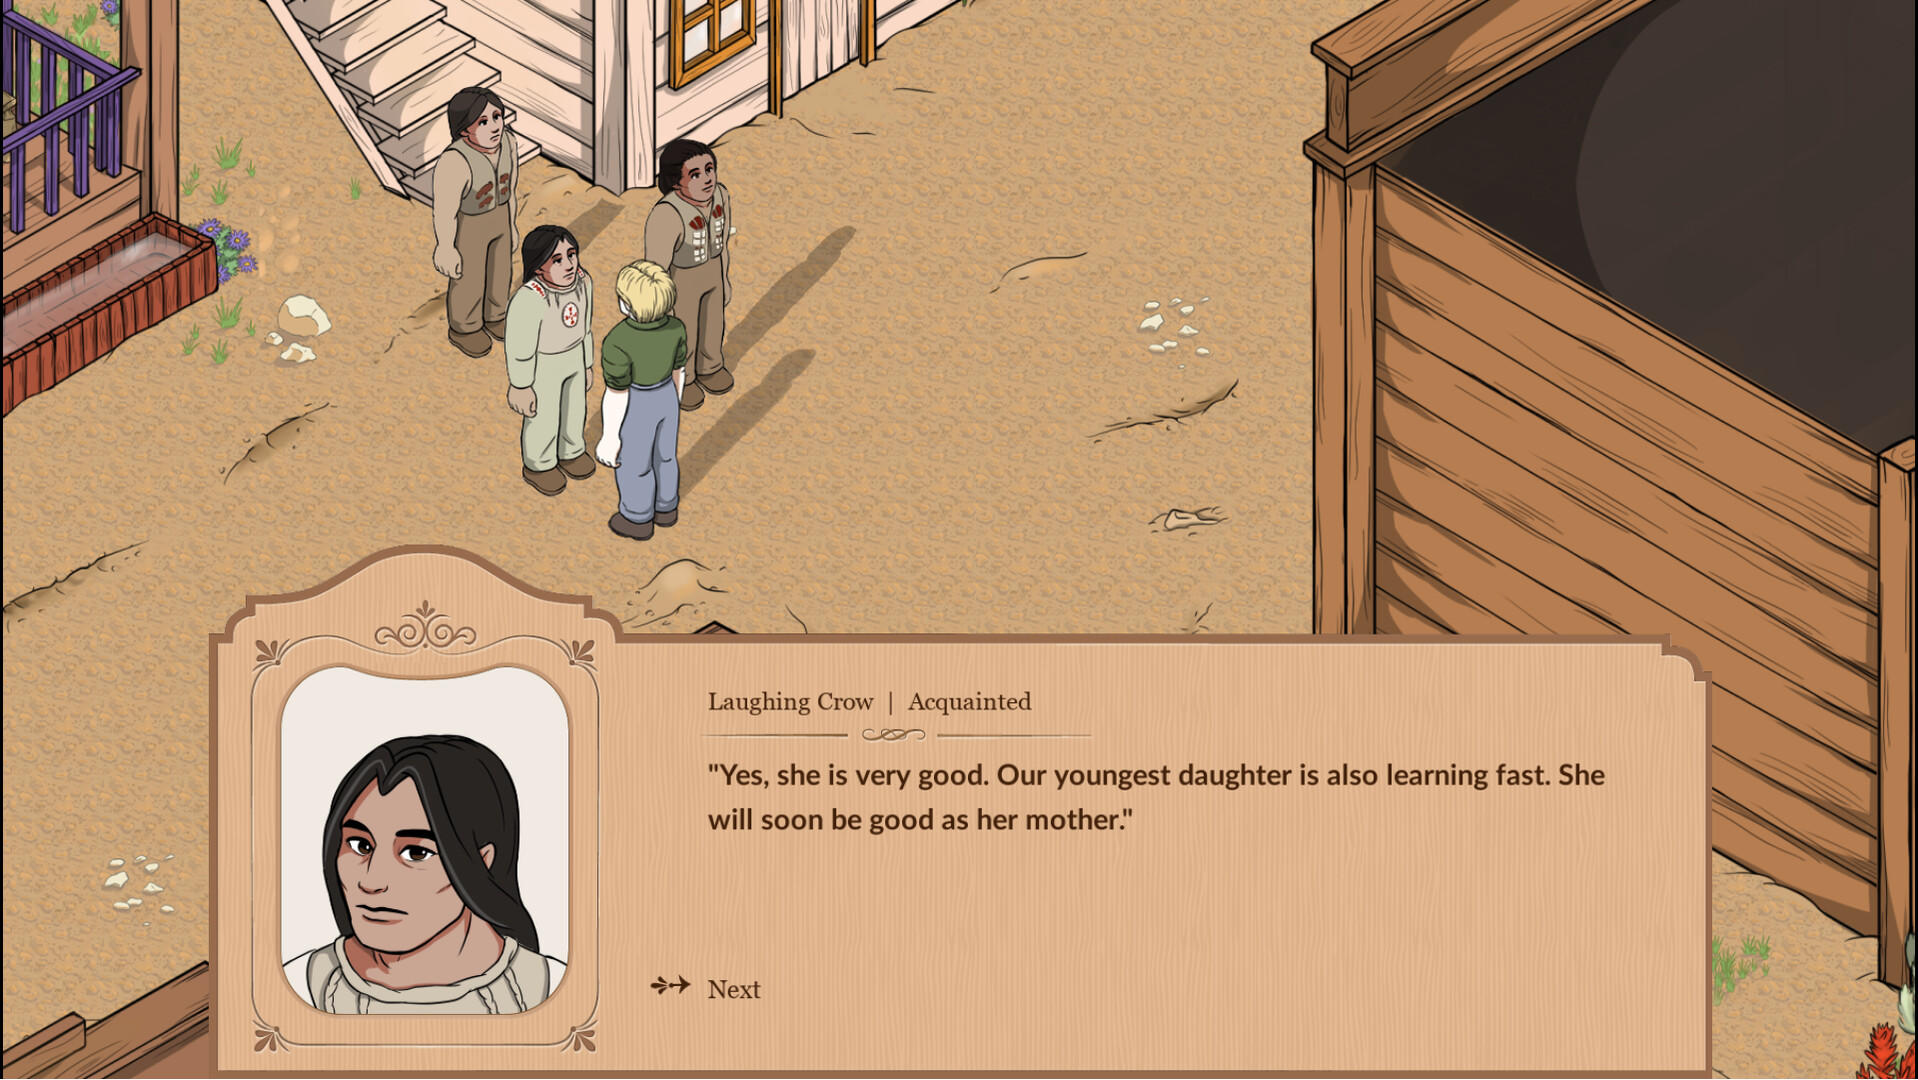 Veil of Dust: A Homesteading Game screenshot game